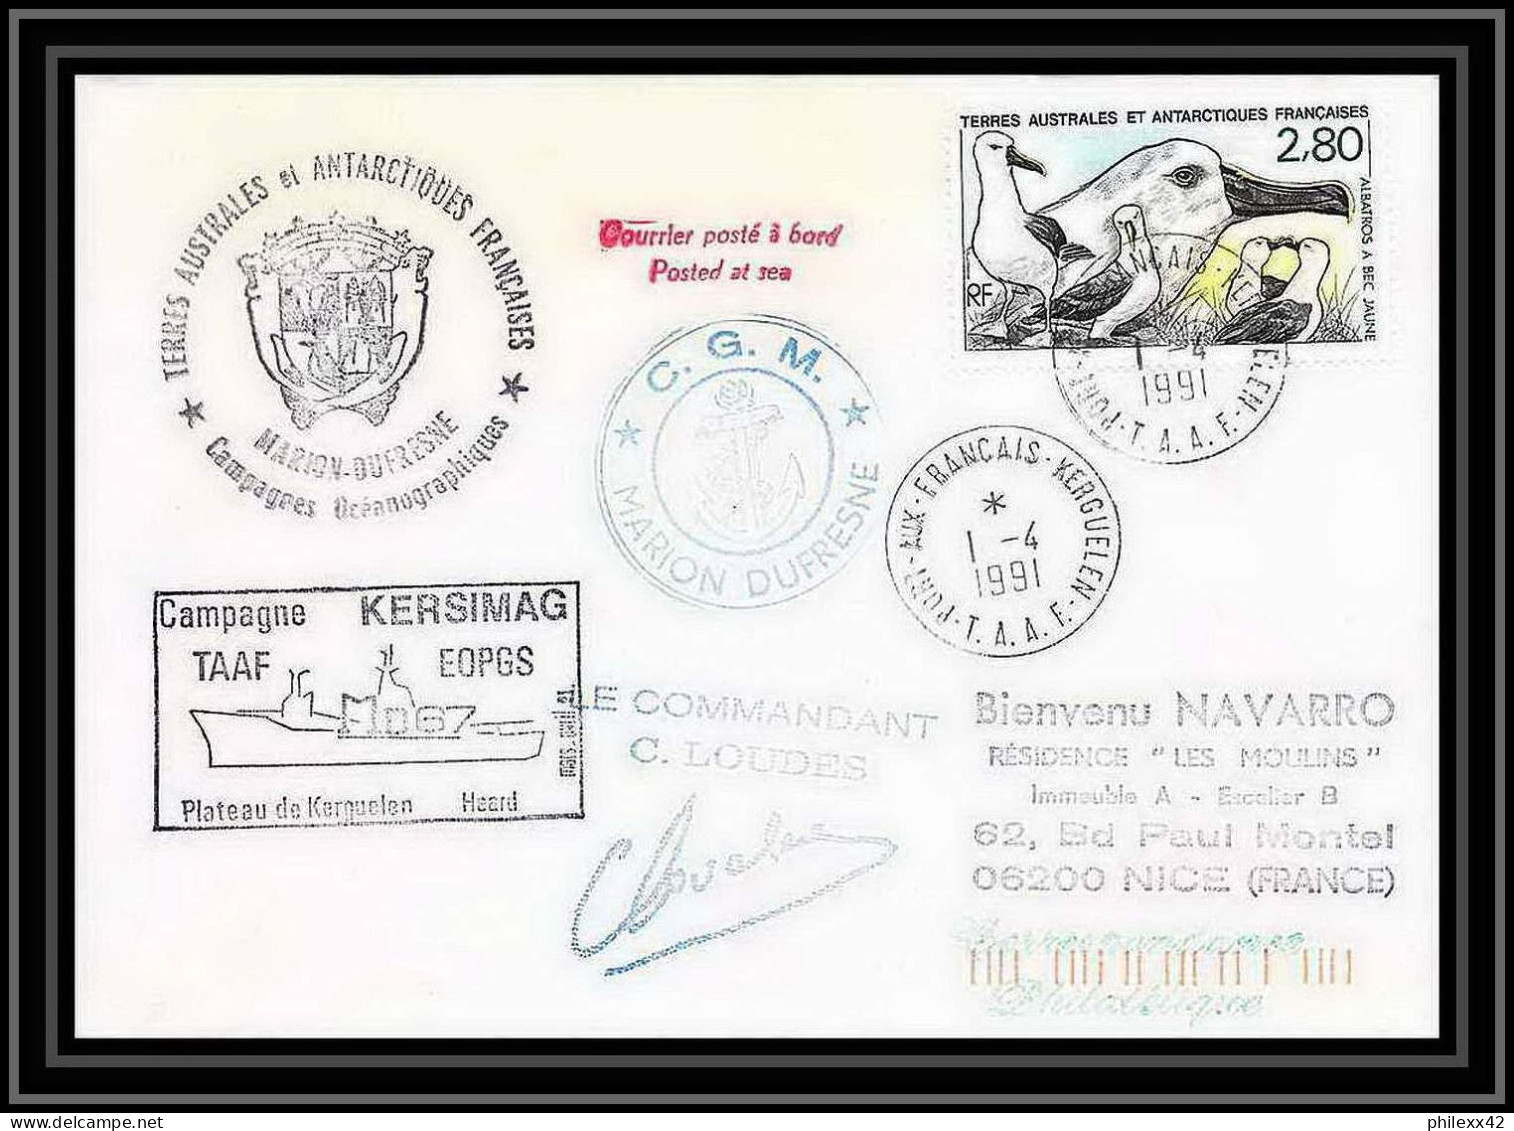 1739 Campagne Mersimag 1/4/1991 Signé Signed Loudes TAAF Antarctic Terres Australes Lettre (cover) - Spedizioni Antartiche